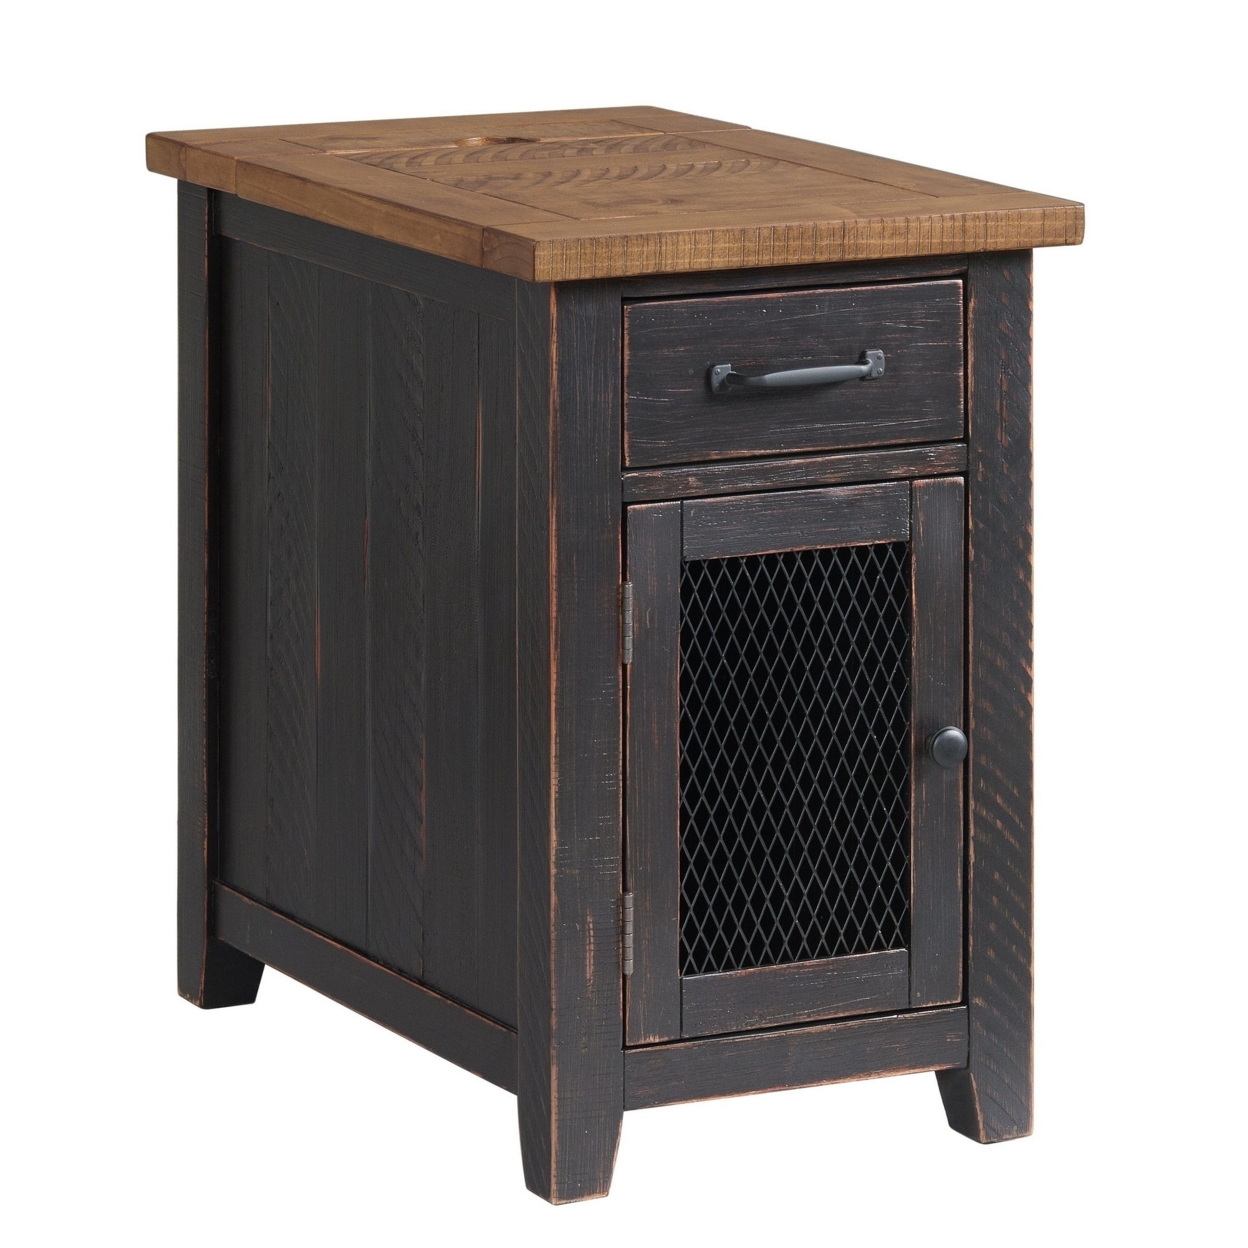 Chairside Table With 1 Drawer And 1 Wire Door, Black And Brown- Saltoro Sherpi